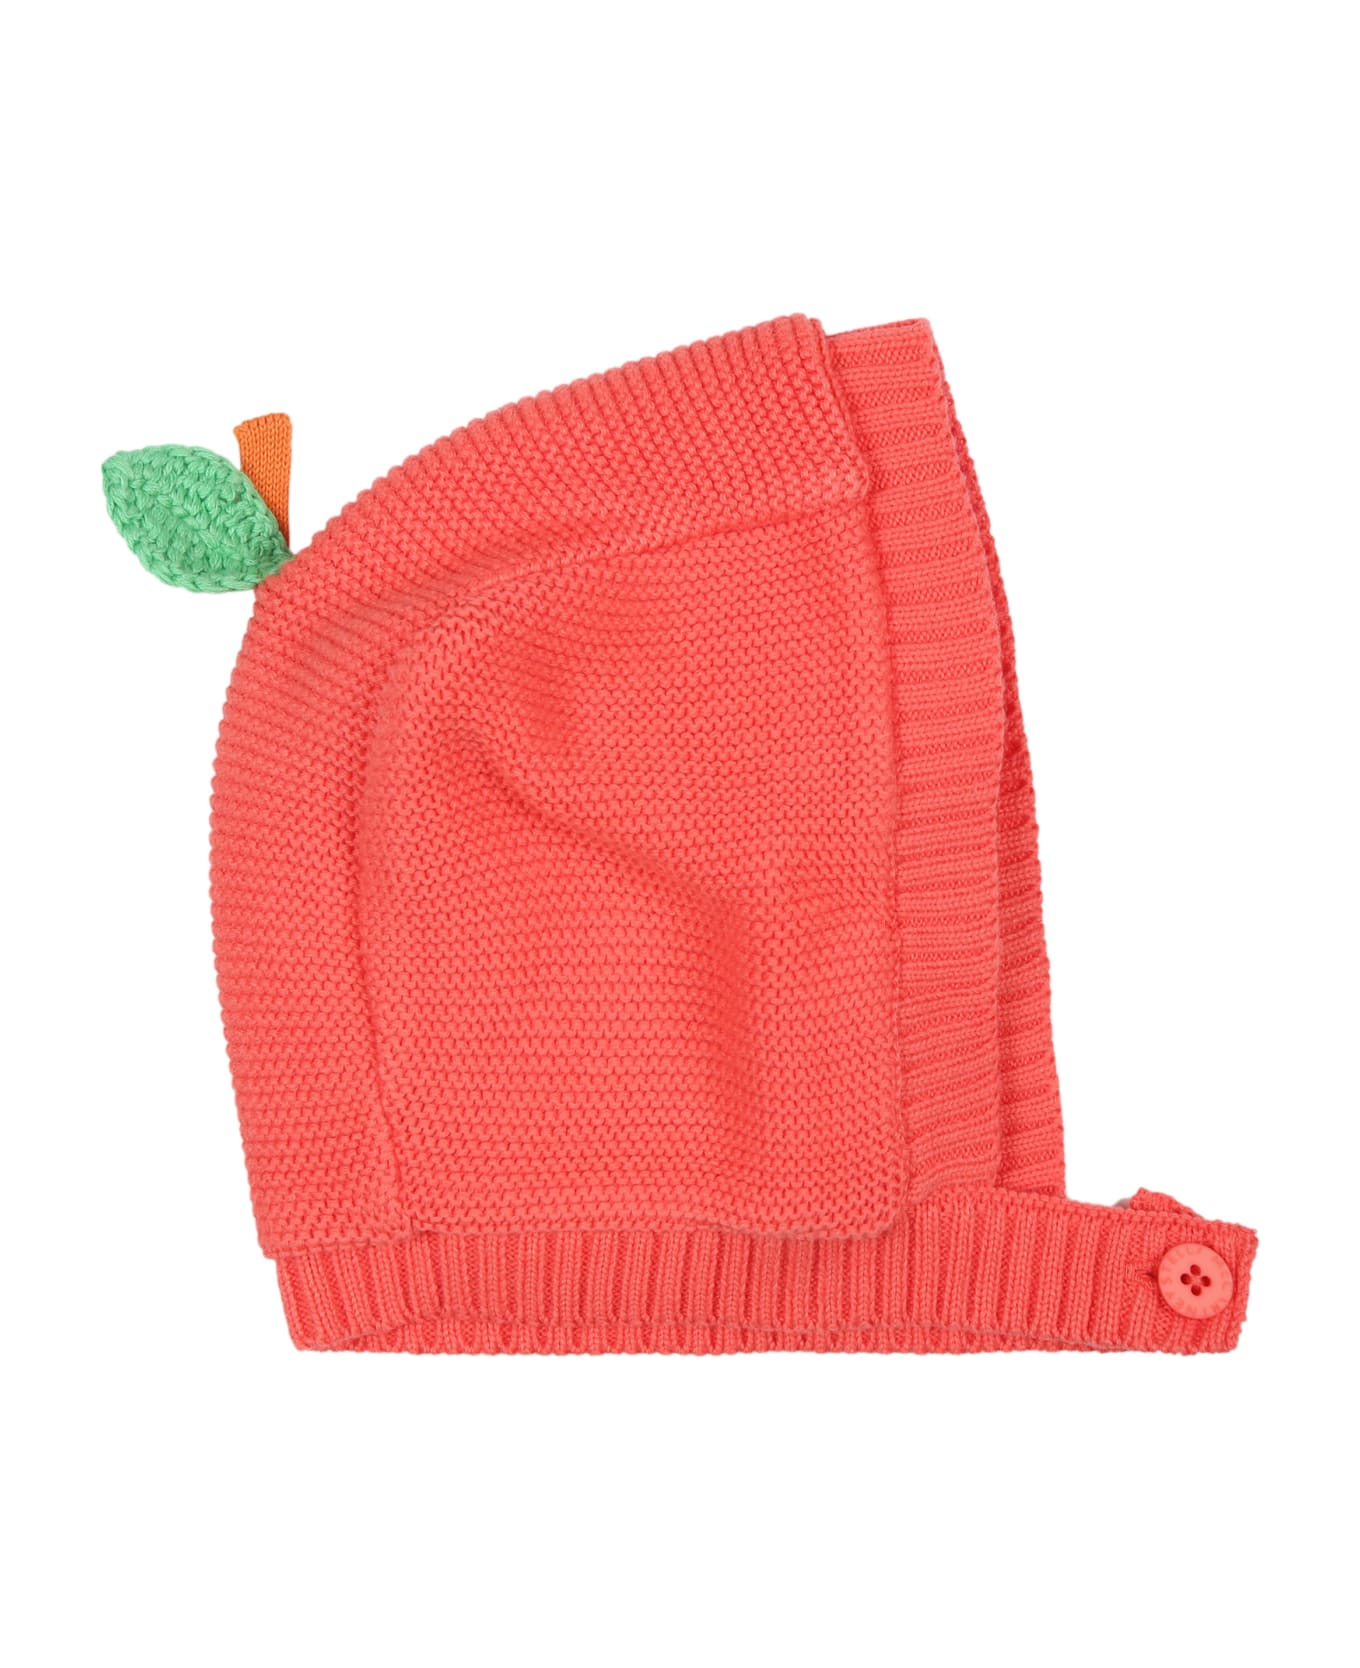 Stella McCartney Kids Red Hat For Baby Girl - Red アクセサリー＆ギフト